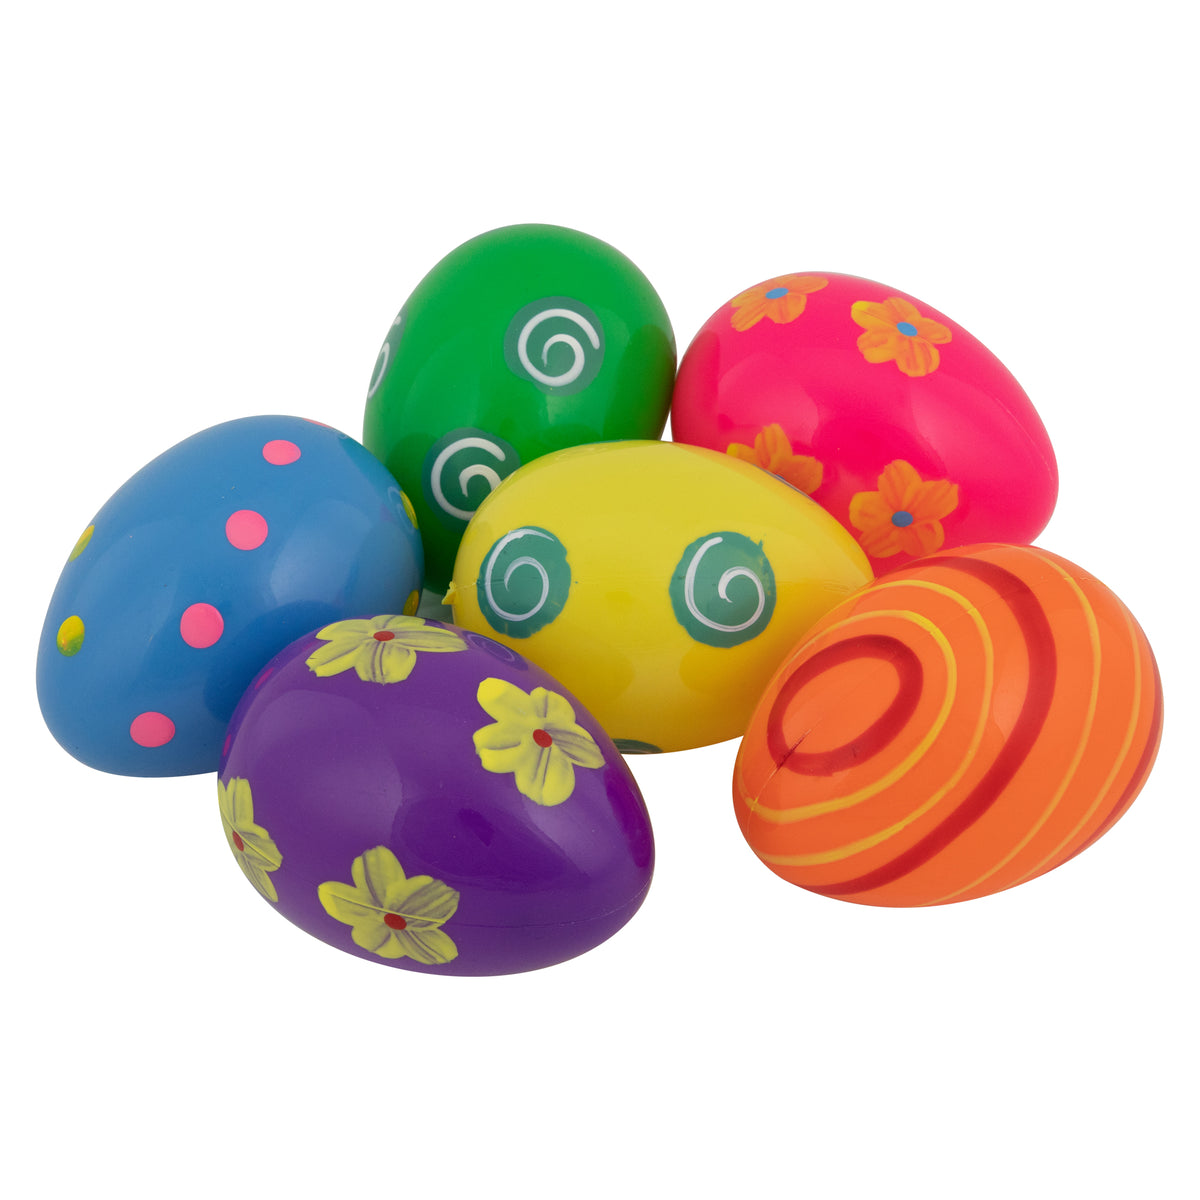 Springtime Easter Eggs, Pack of 6 Vibrantly Colored